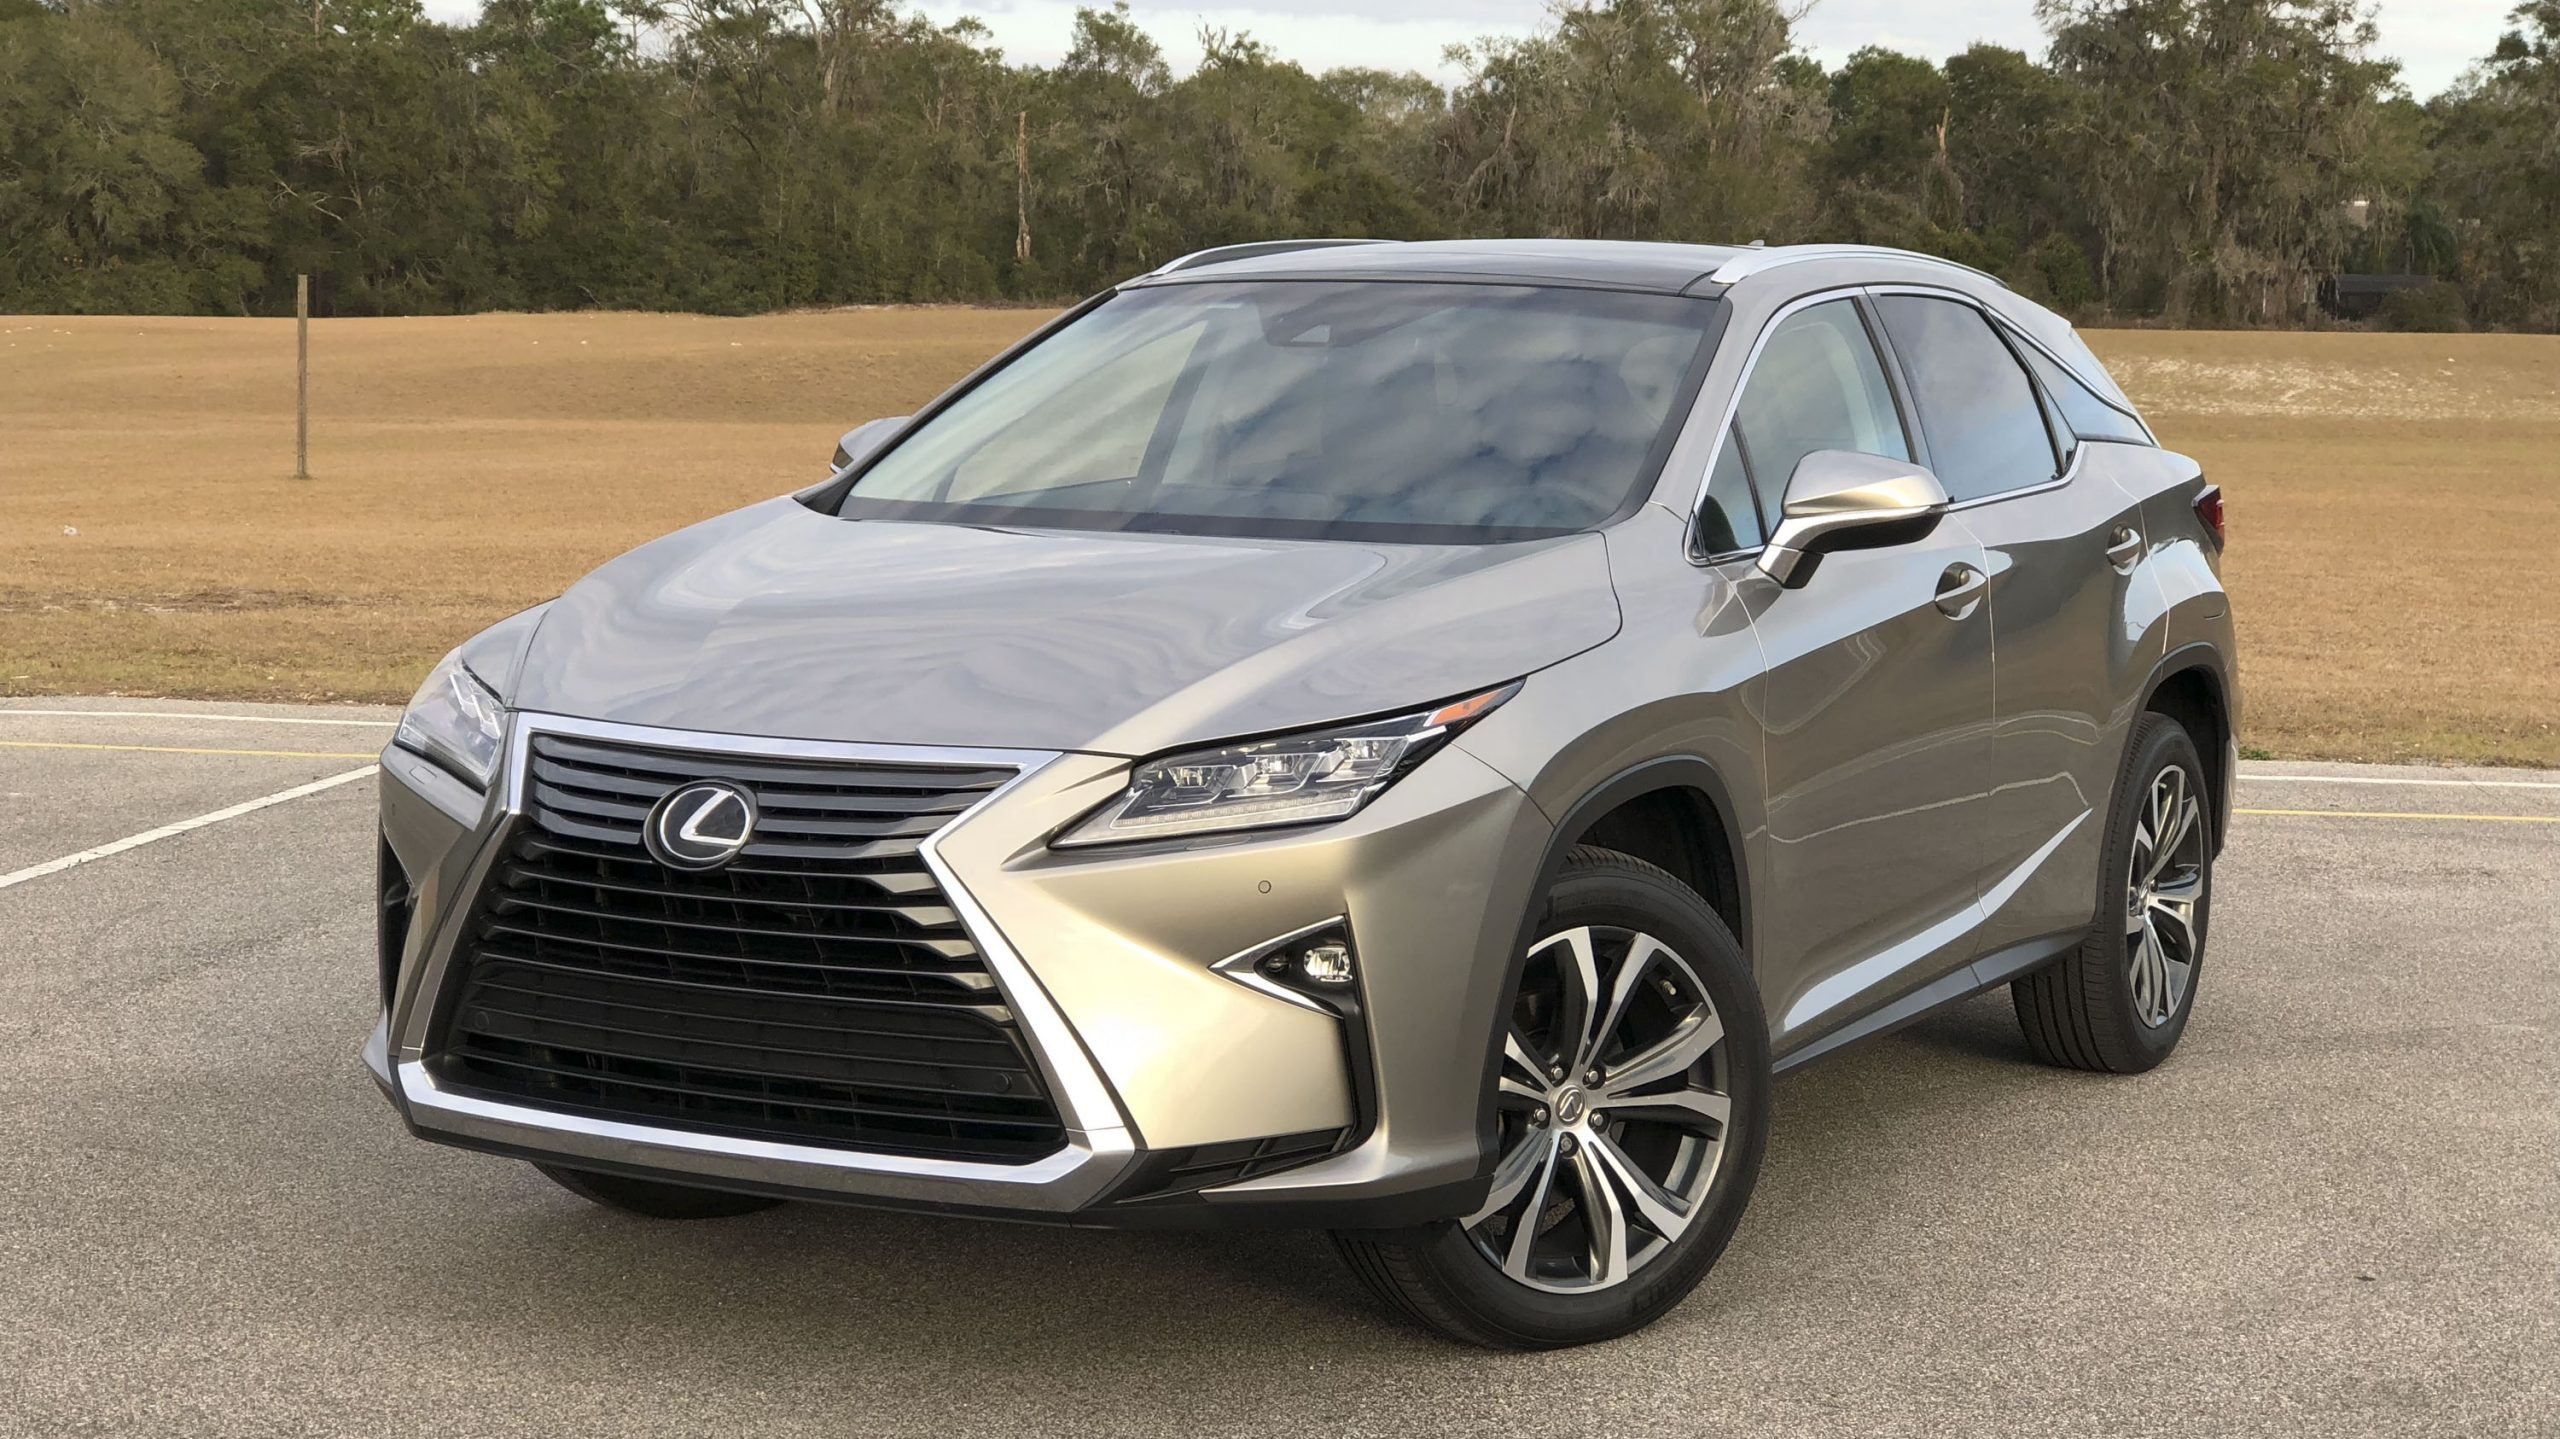 New 2022 Lexus Rx 350 Options And Packages, Oil Type, Options Lexus